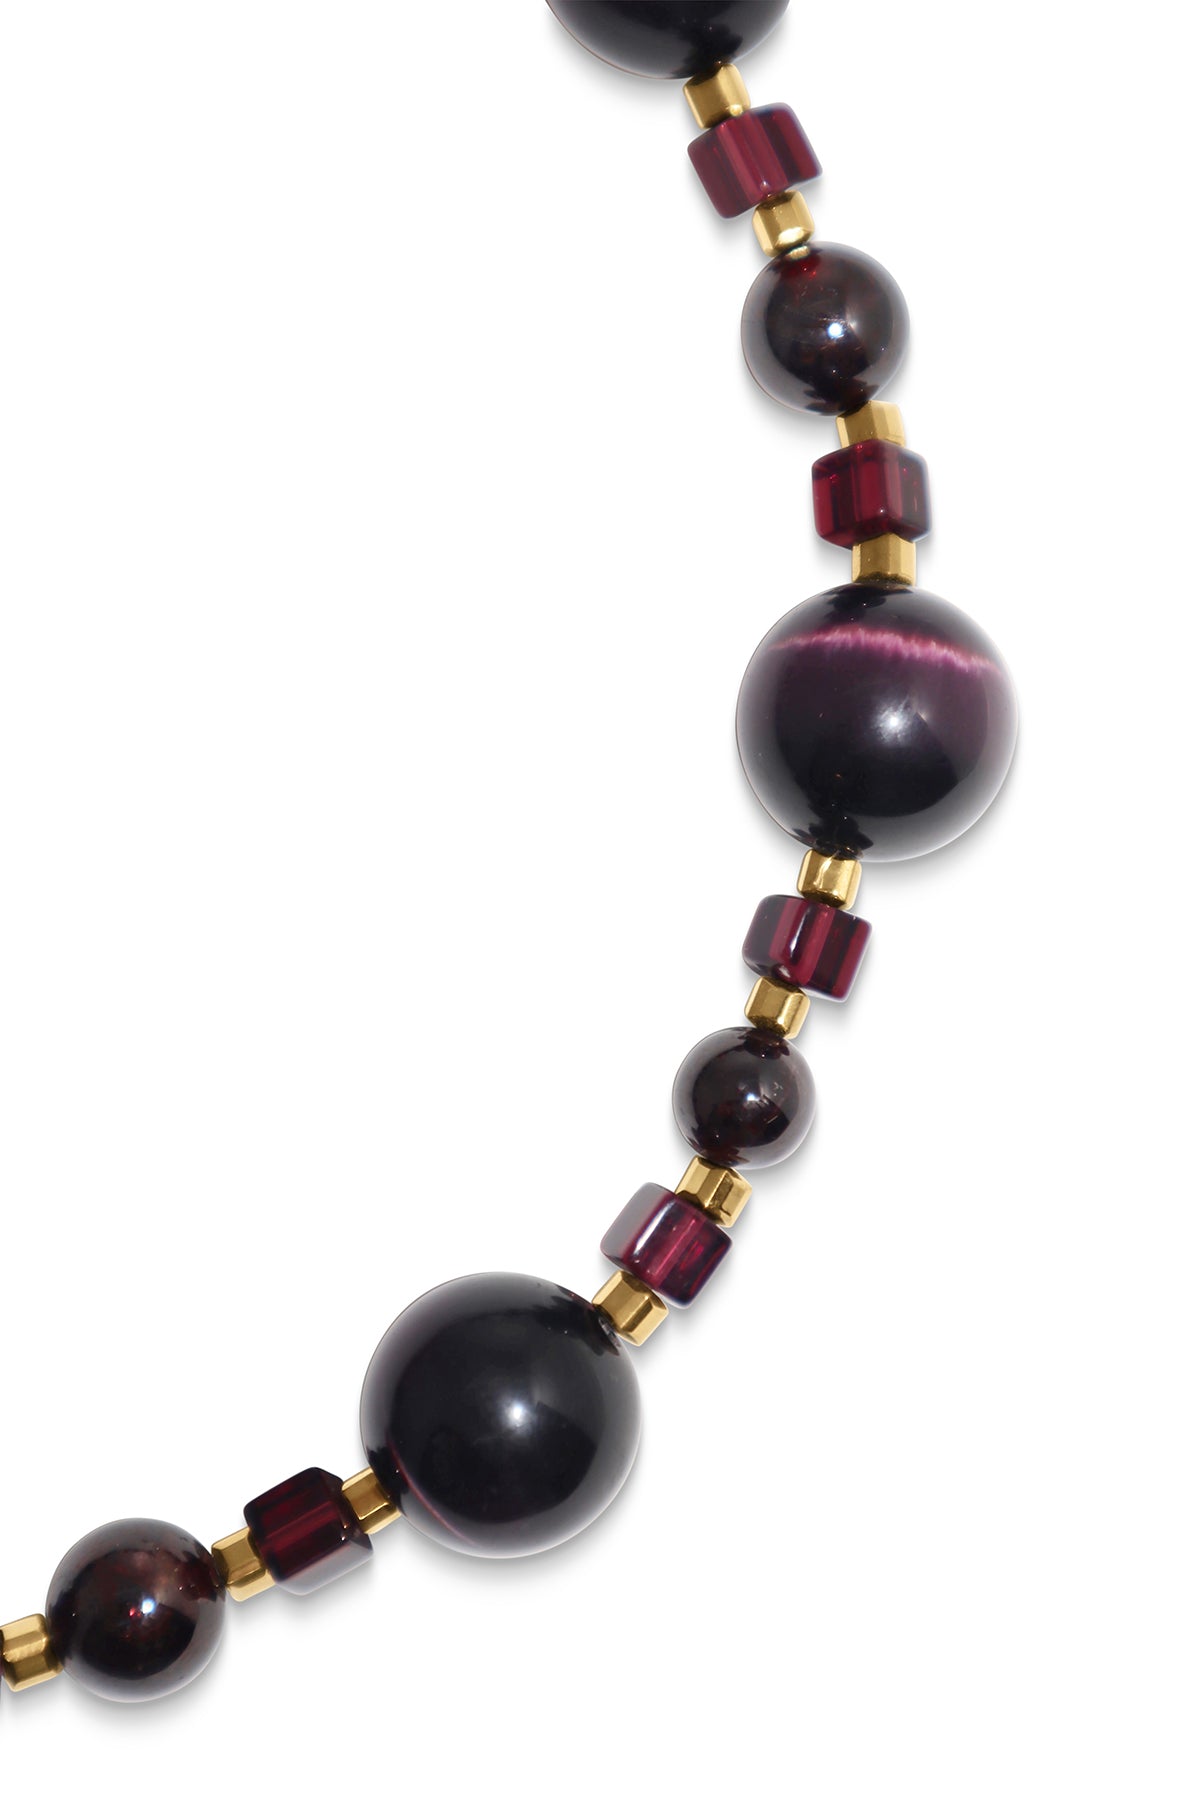 INGA KAZUMYAN's necklace is strung with cat-eye beads.  Moreover, the cat-eye beads are thought to improve your spiritual abilities.